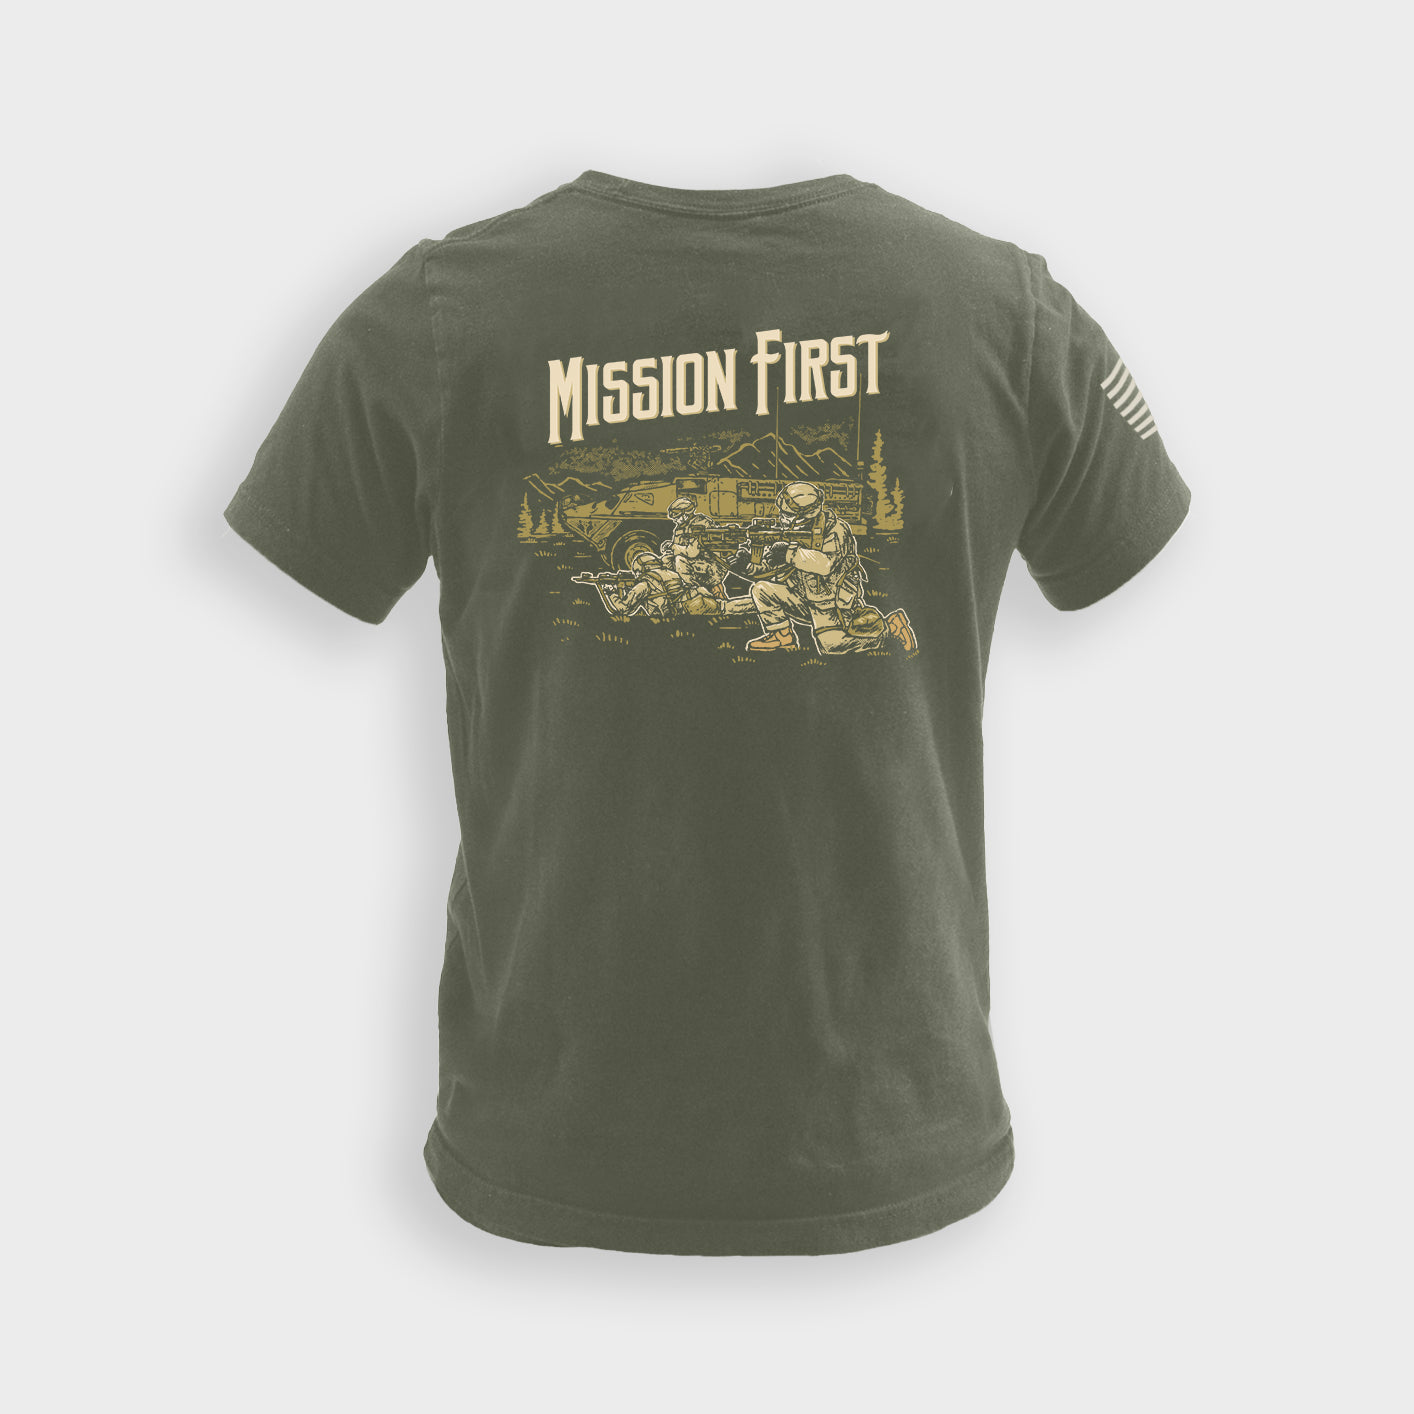 Mission First - Army Tee